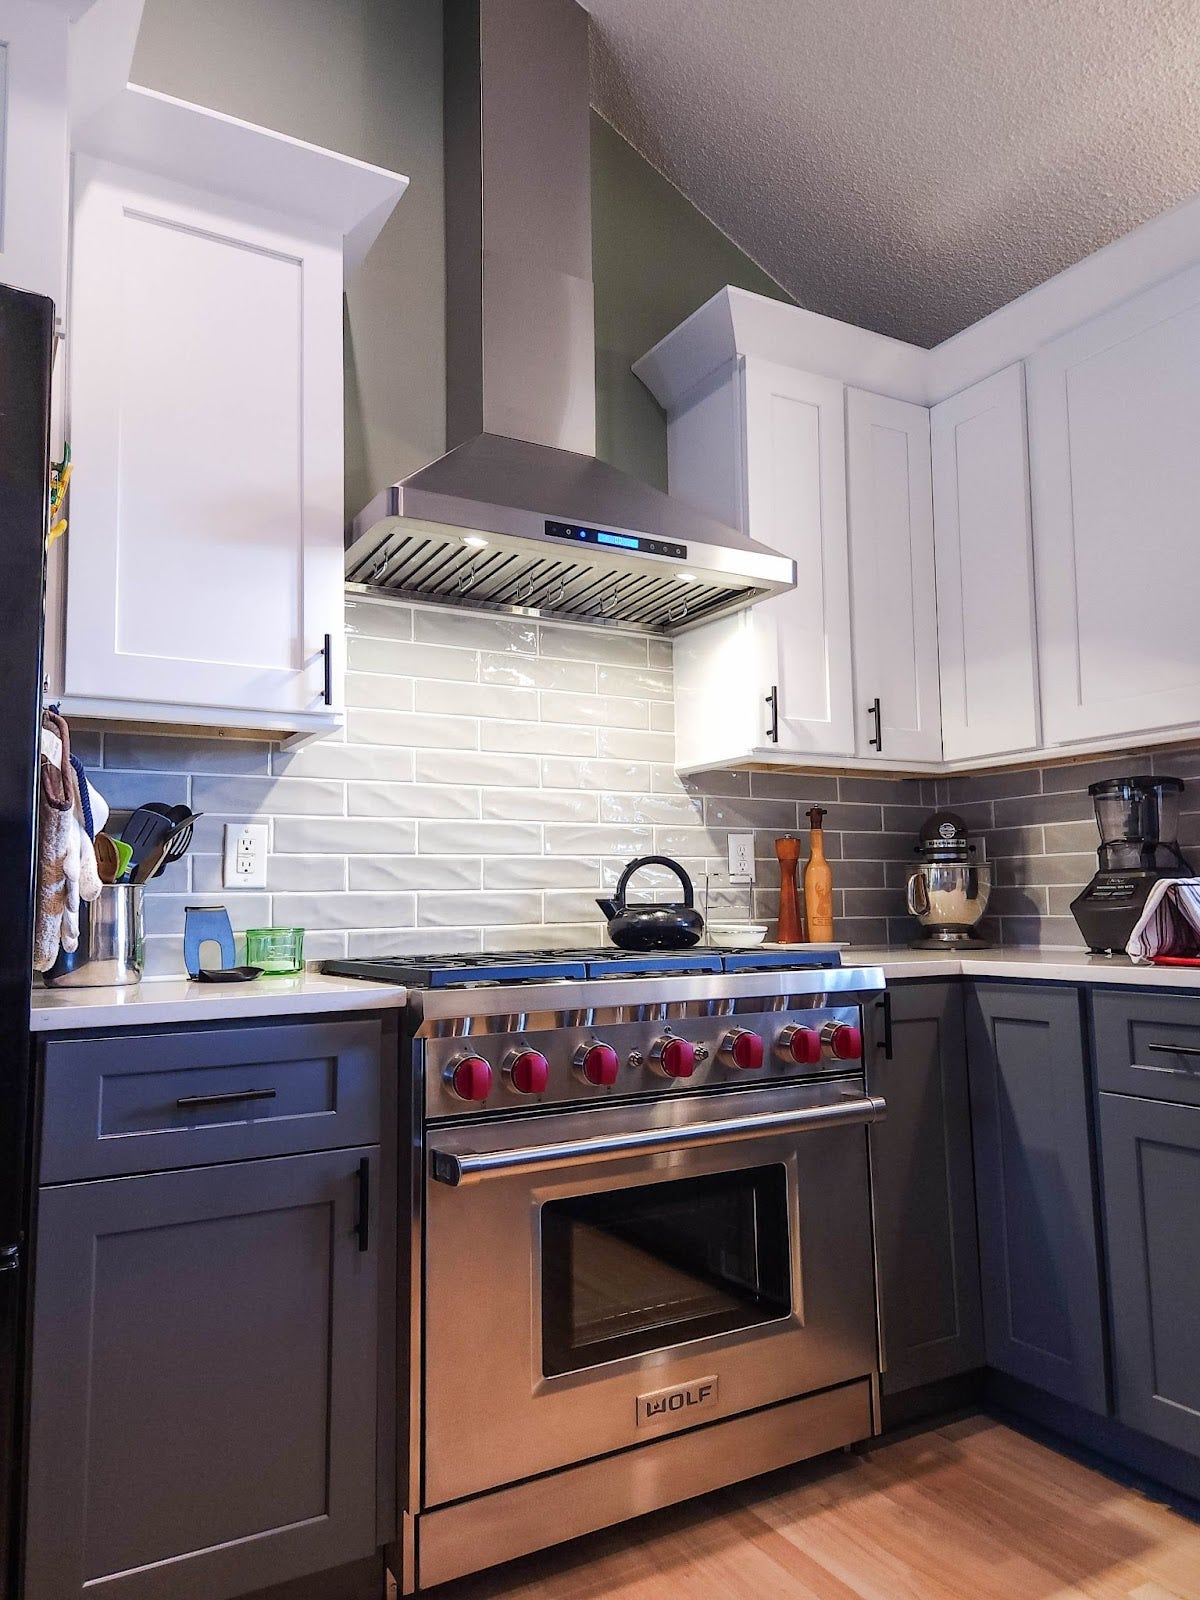 Proline range hood complements stainless steel appliances and white cabinets in a modern kitchen. - Proline Range Hoods - prolinerangehoods.com 